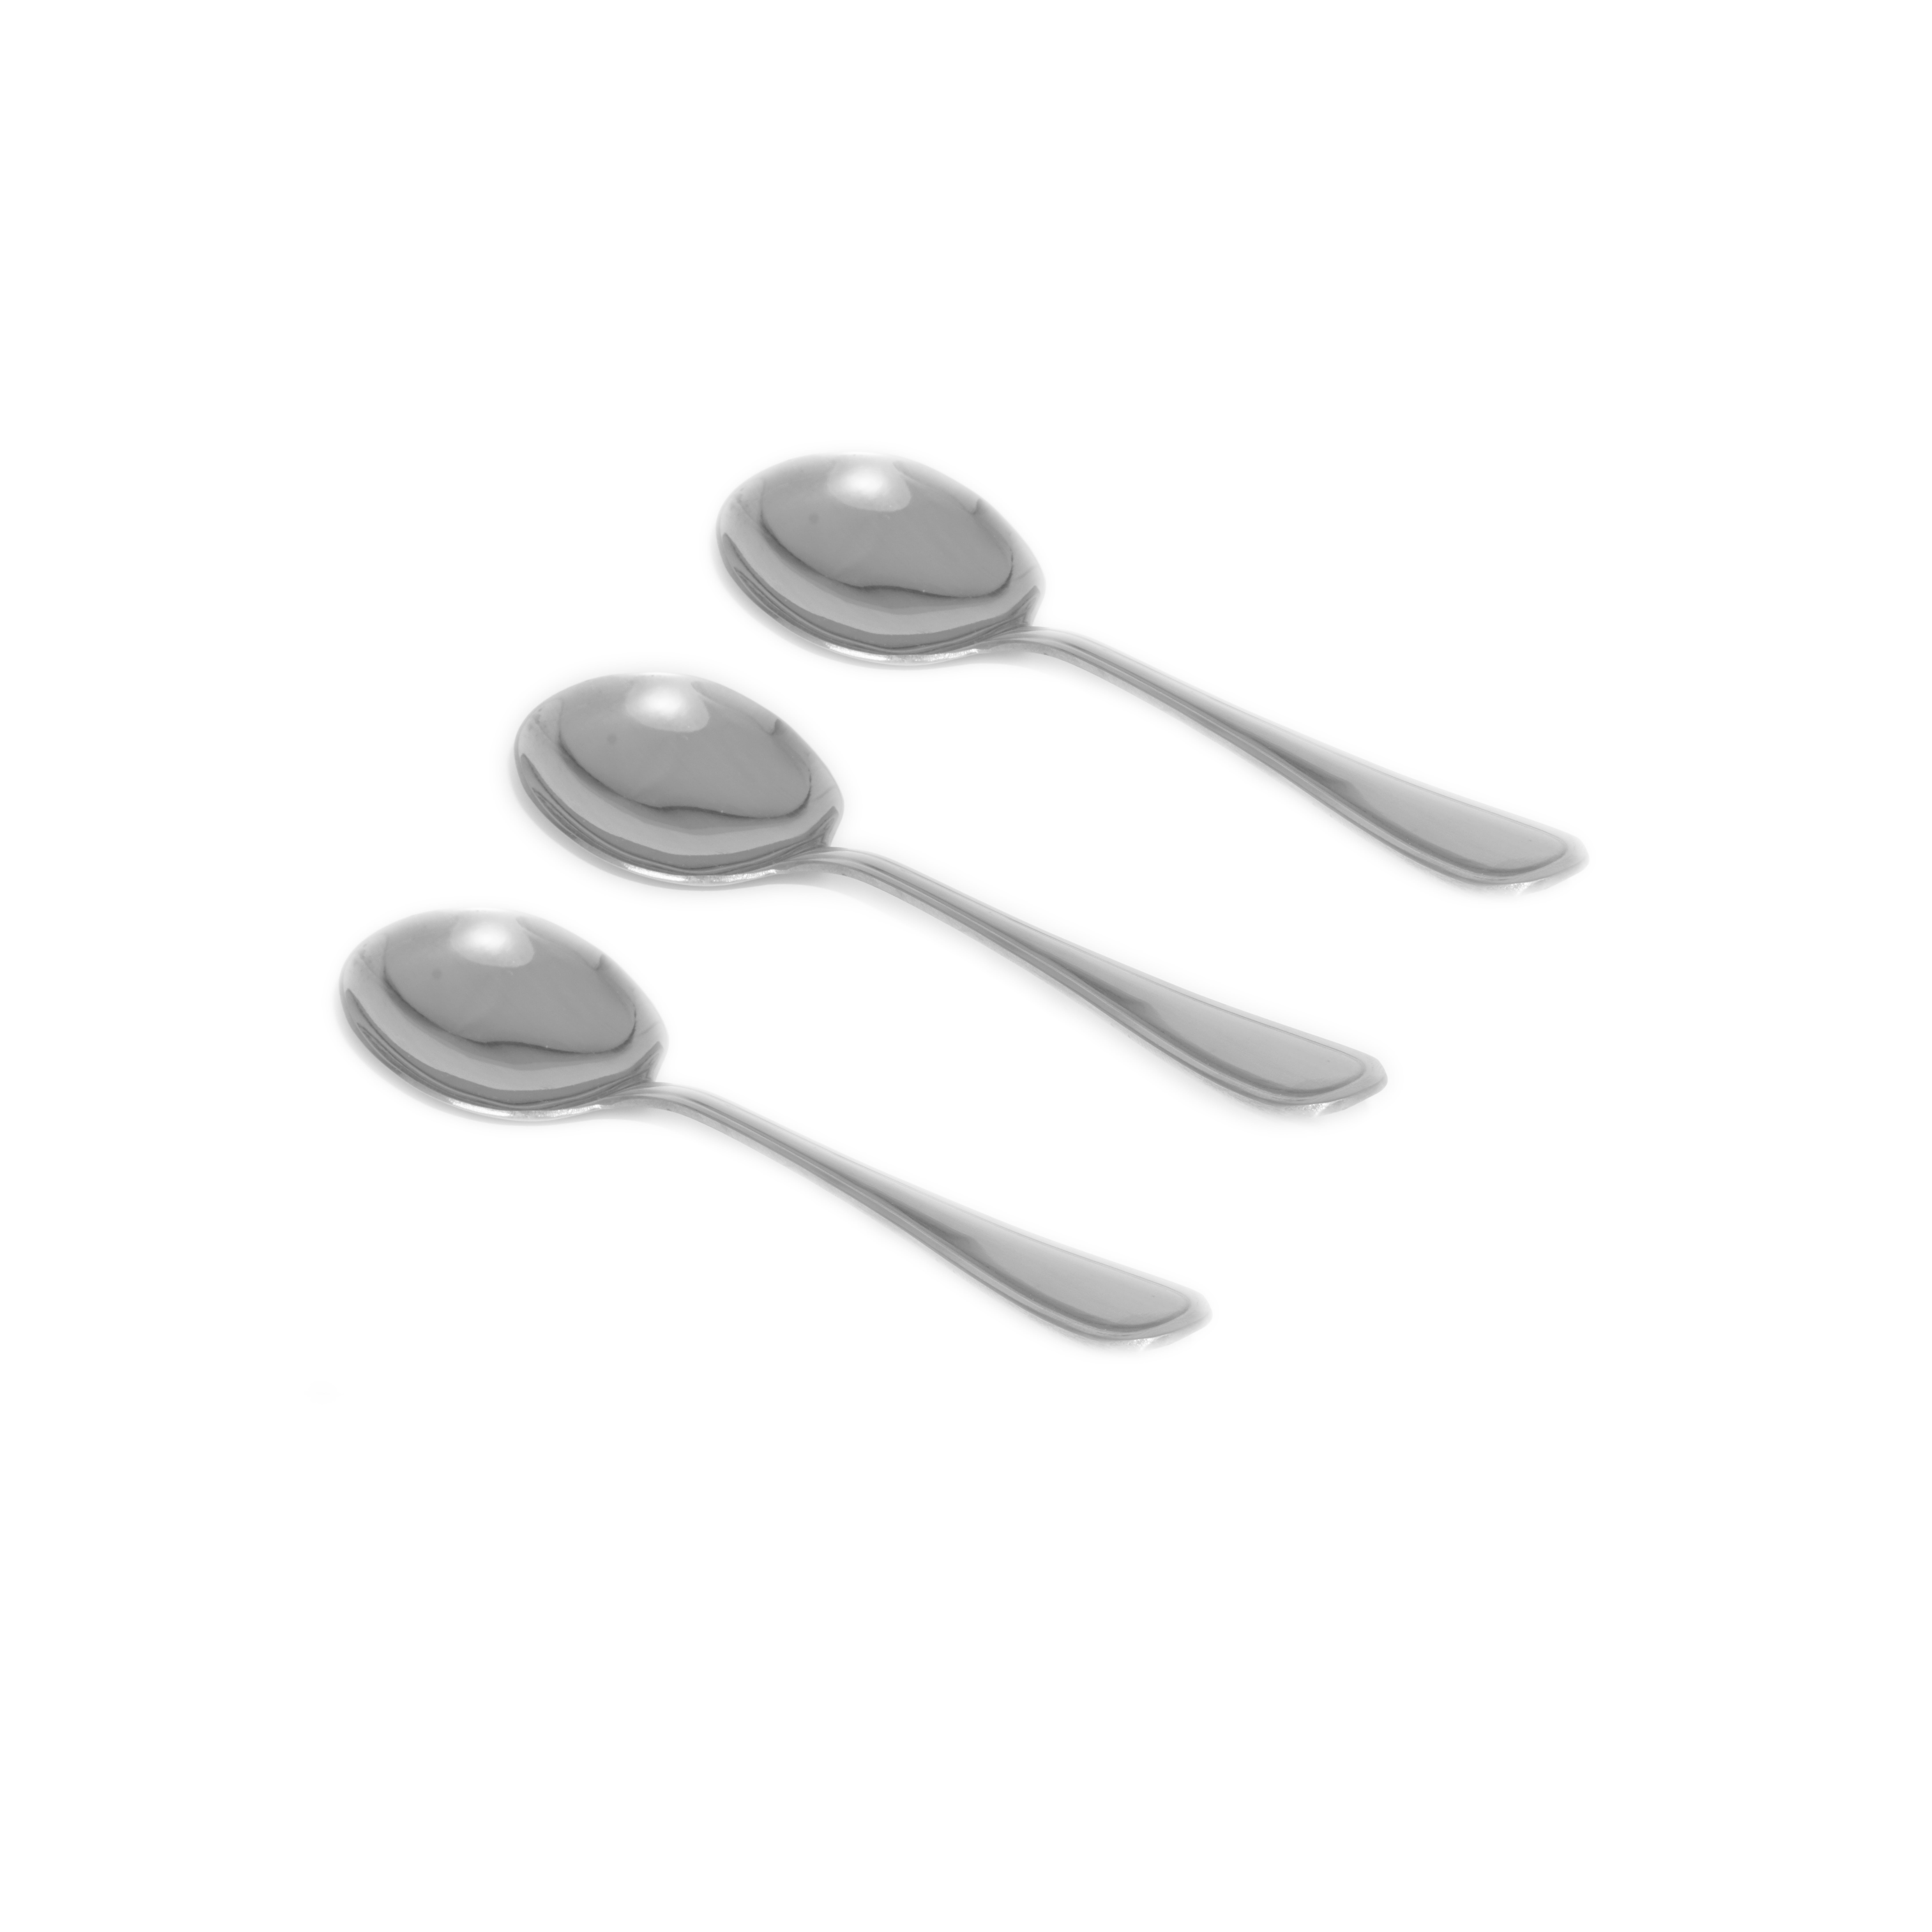 Espresso etc. Coffee Spoon Desert Spoon ERCRYSTO Stainless Steel Spoon etc Set of 4 Children Soup Spoon Light Weight and Small Size Especially Suitable for Toddlers